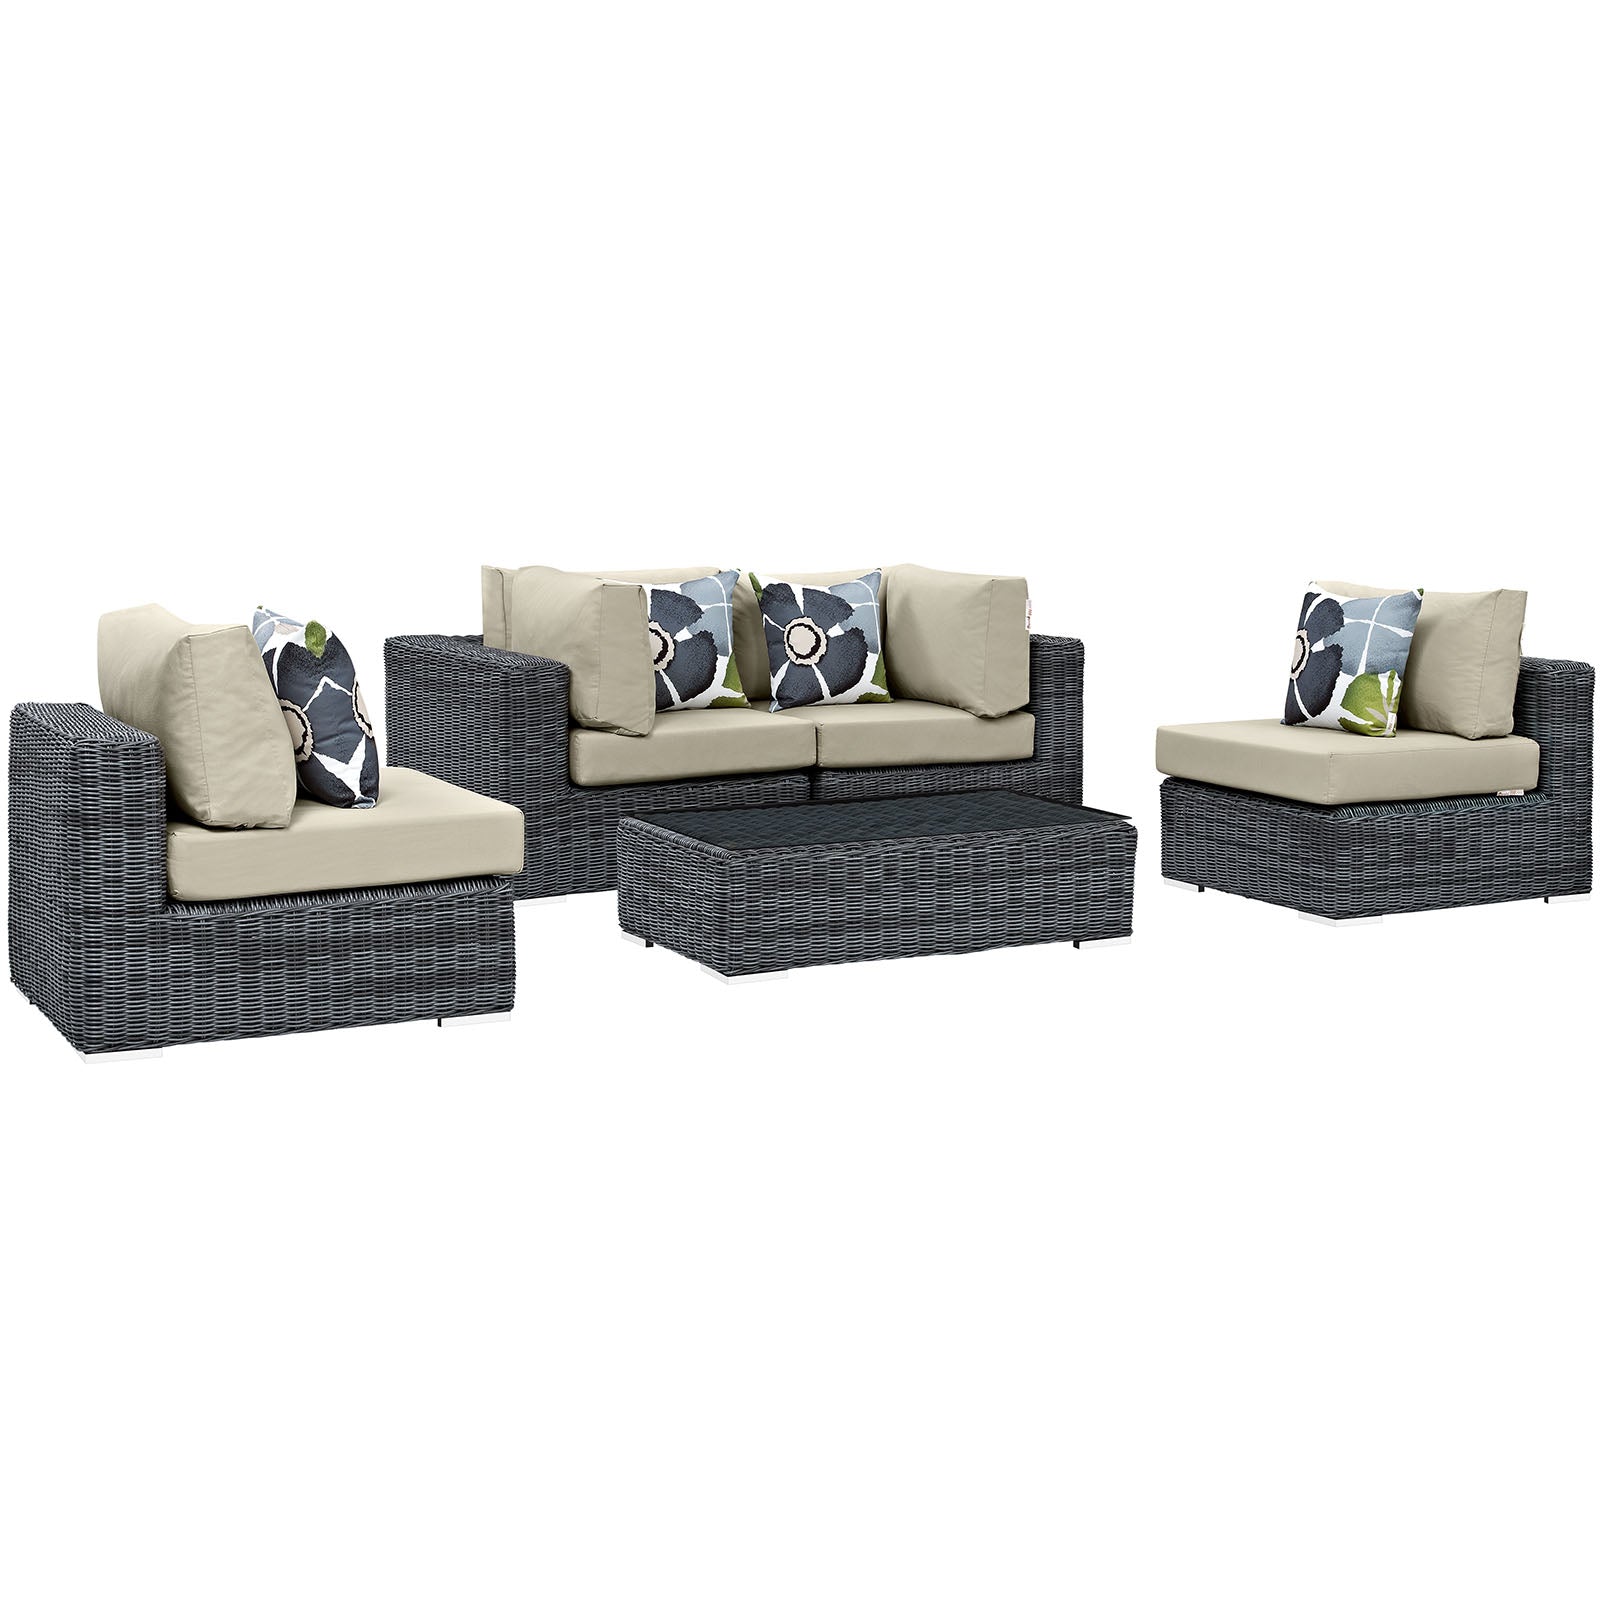 Summon 5 Piece Outdoor Patio Sunbrella Sectional Set With Table and Pillows